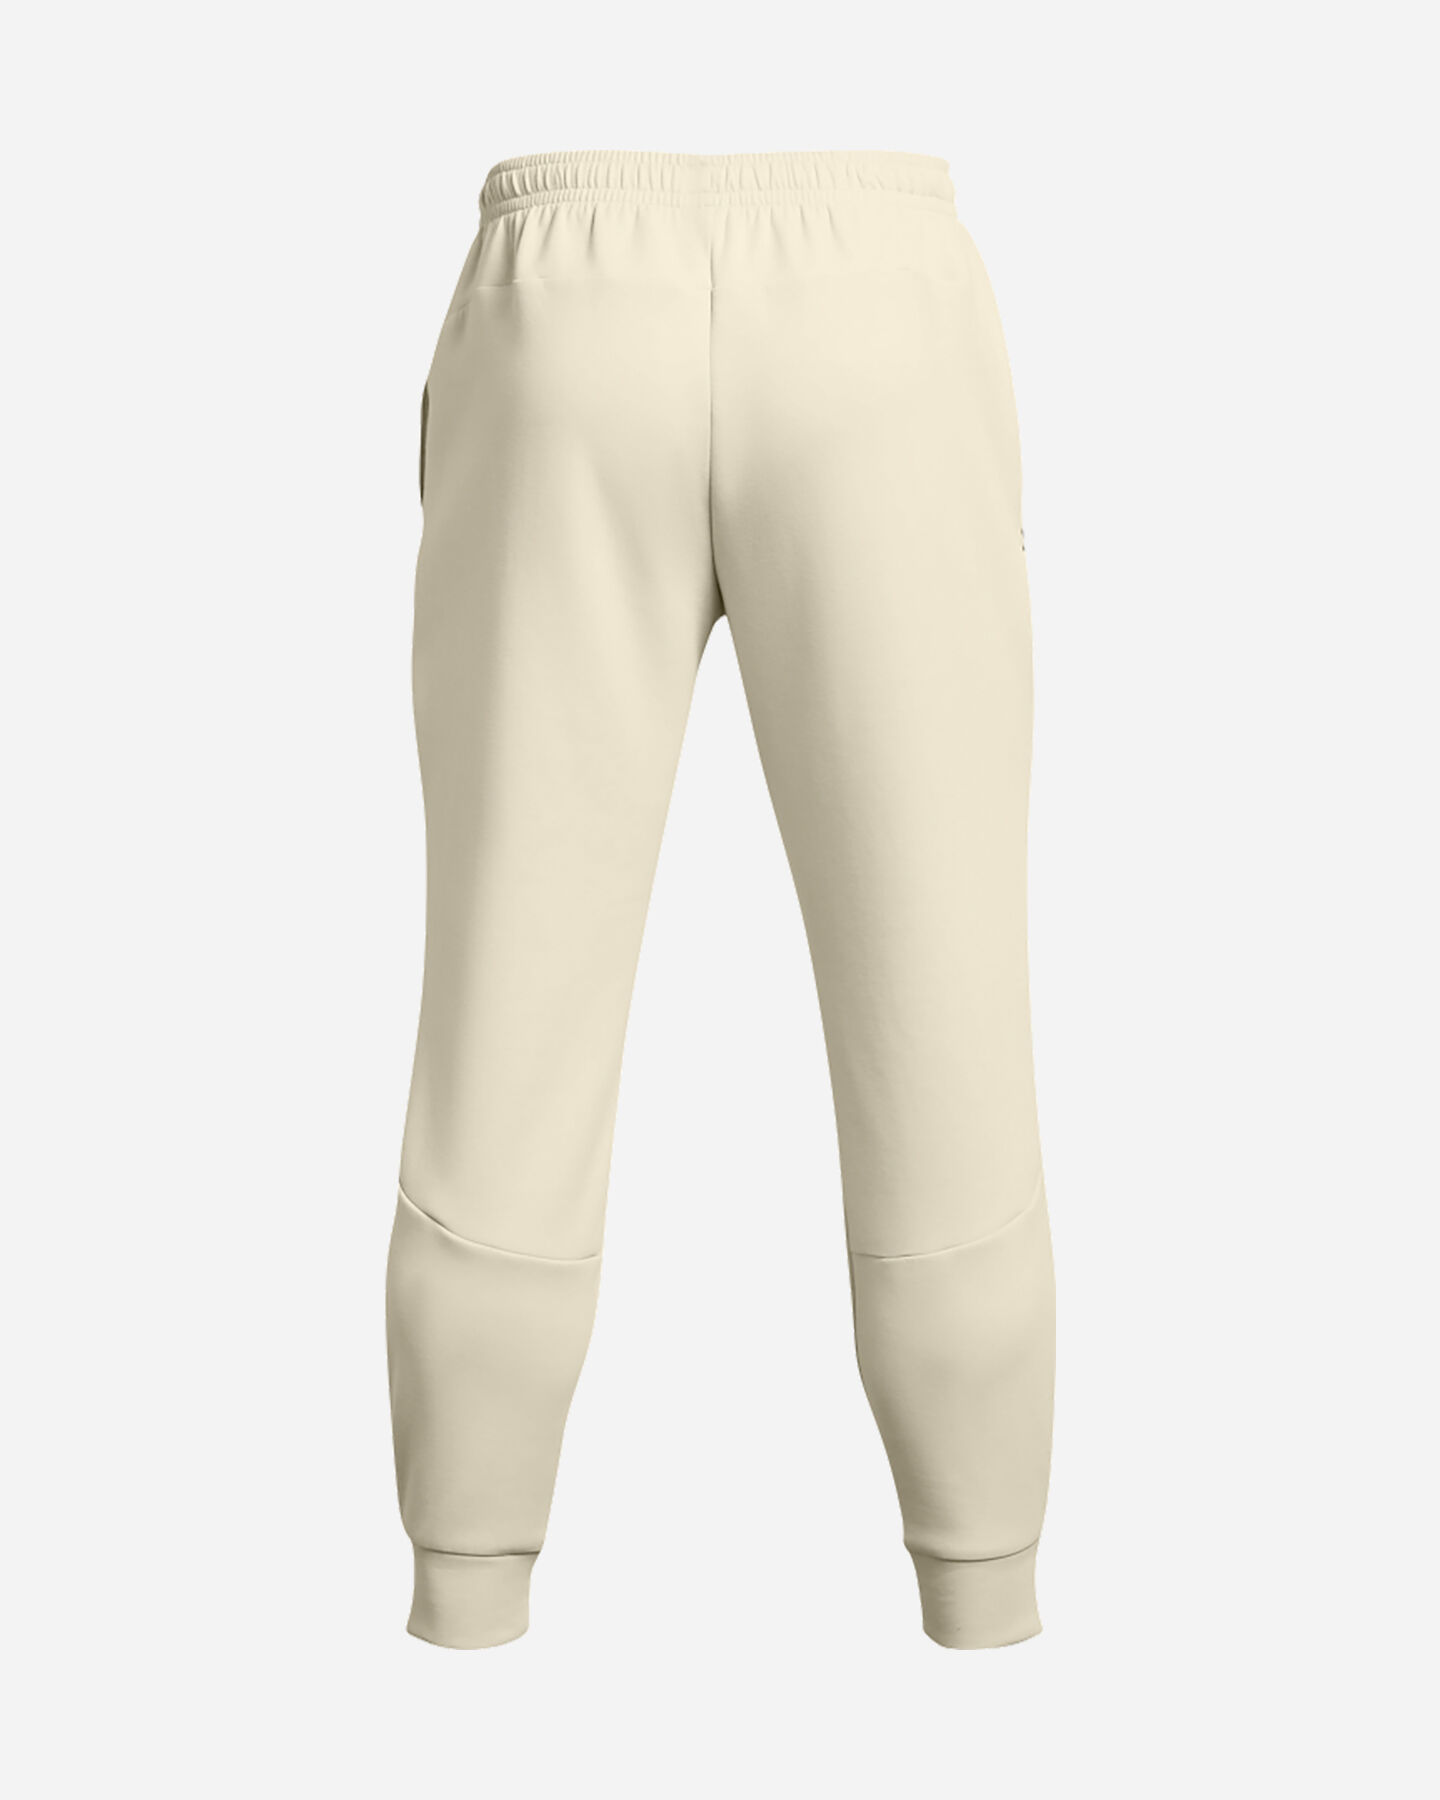  Pantalone UNDER ARMOUR UNSTOPPABLE M S5641304|0273|SM scatto 1